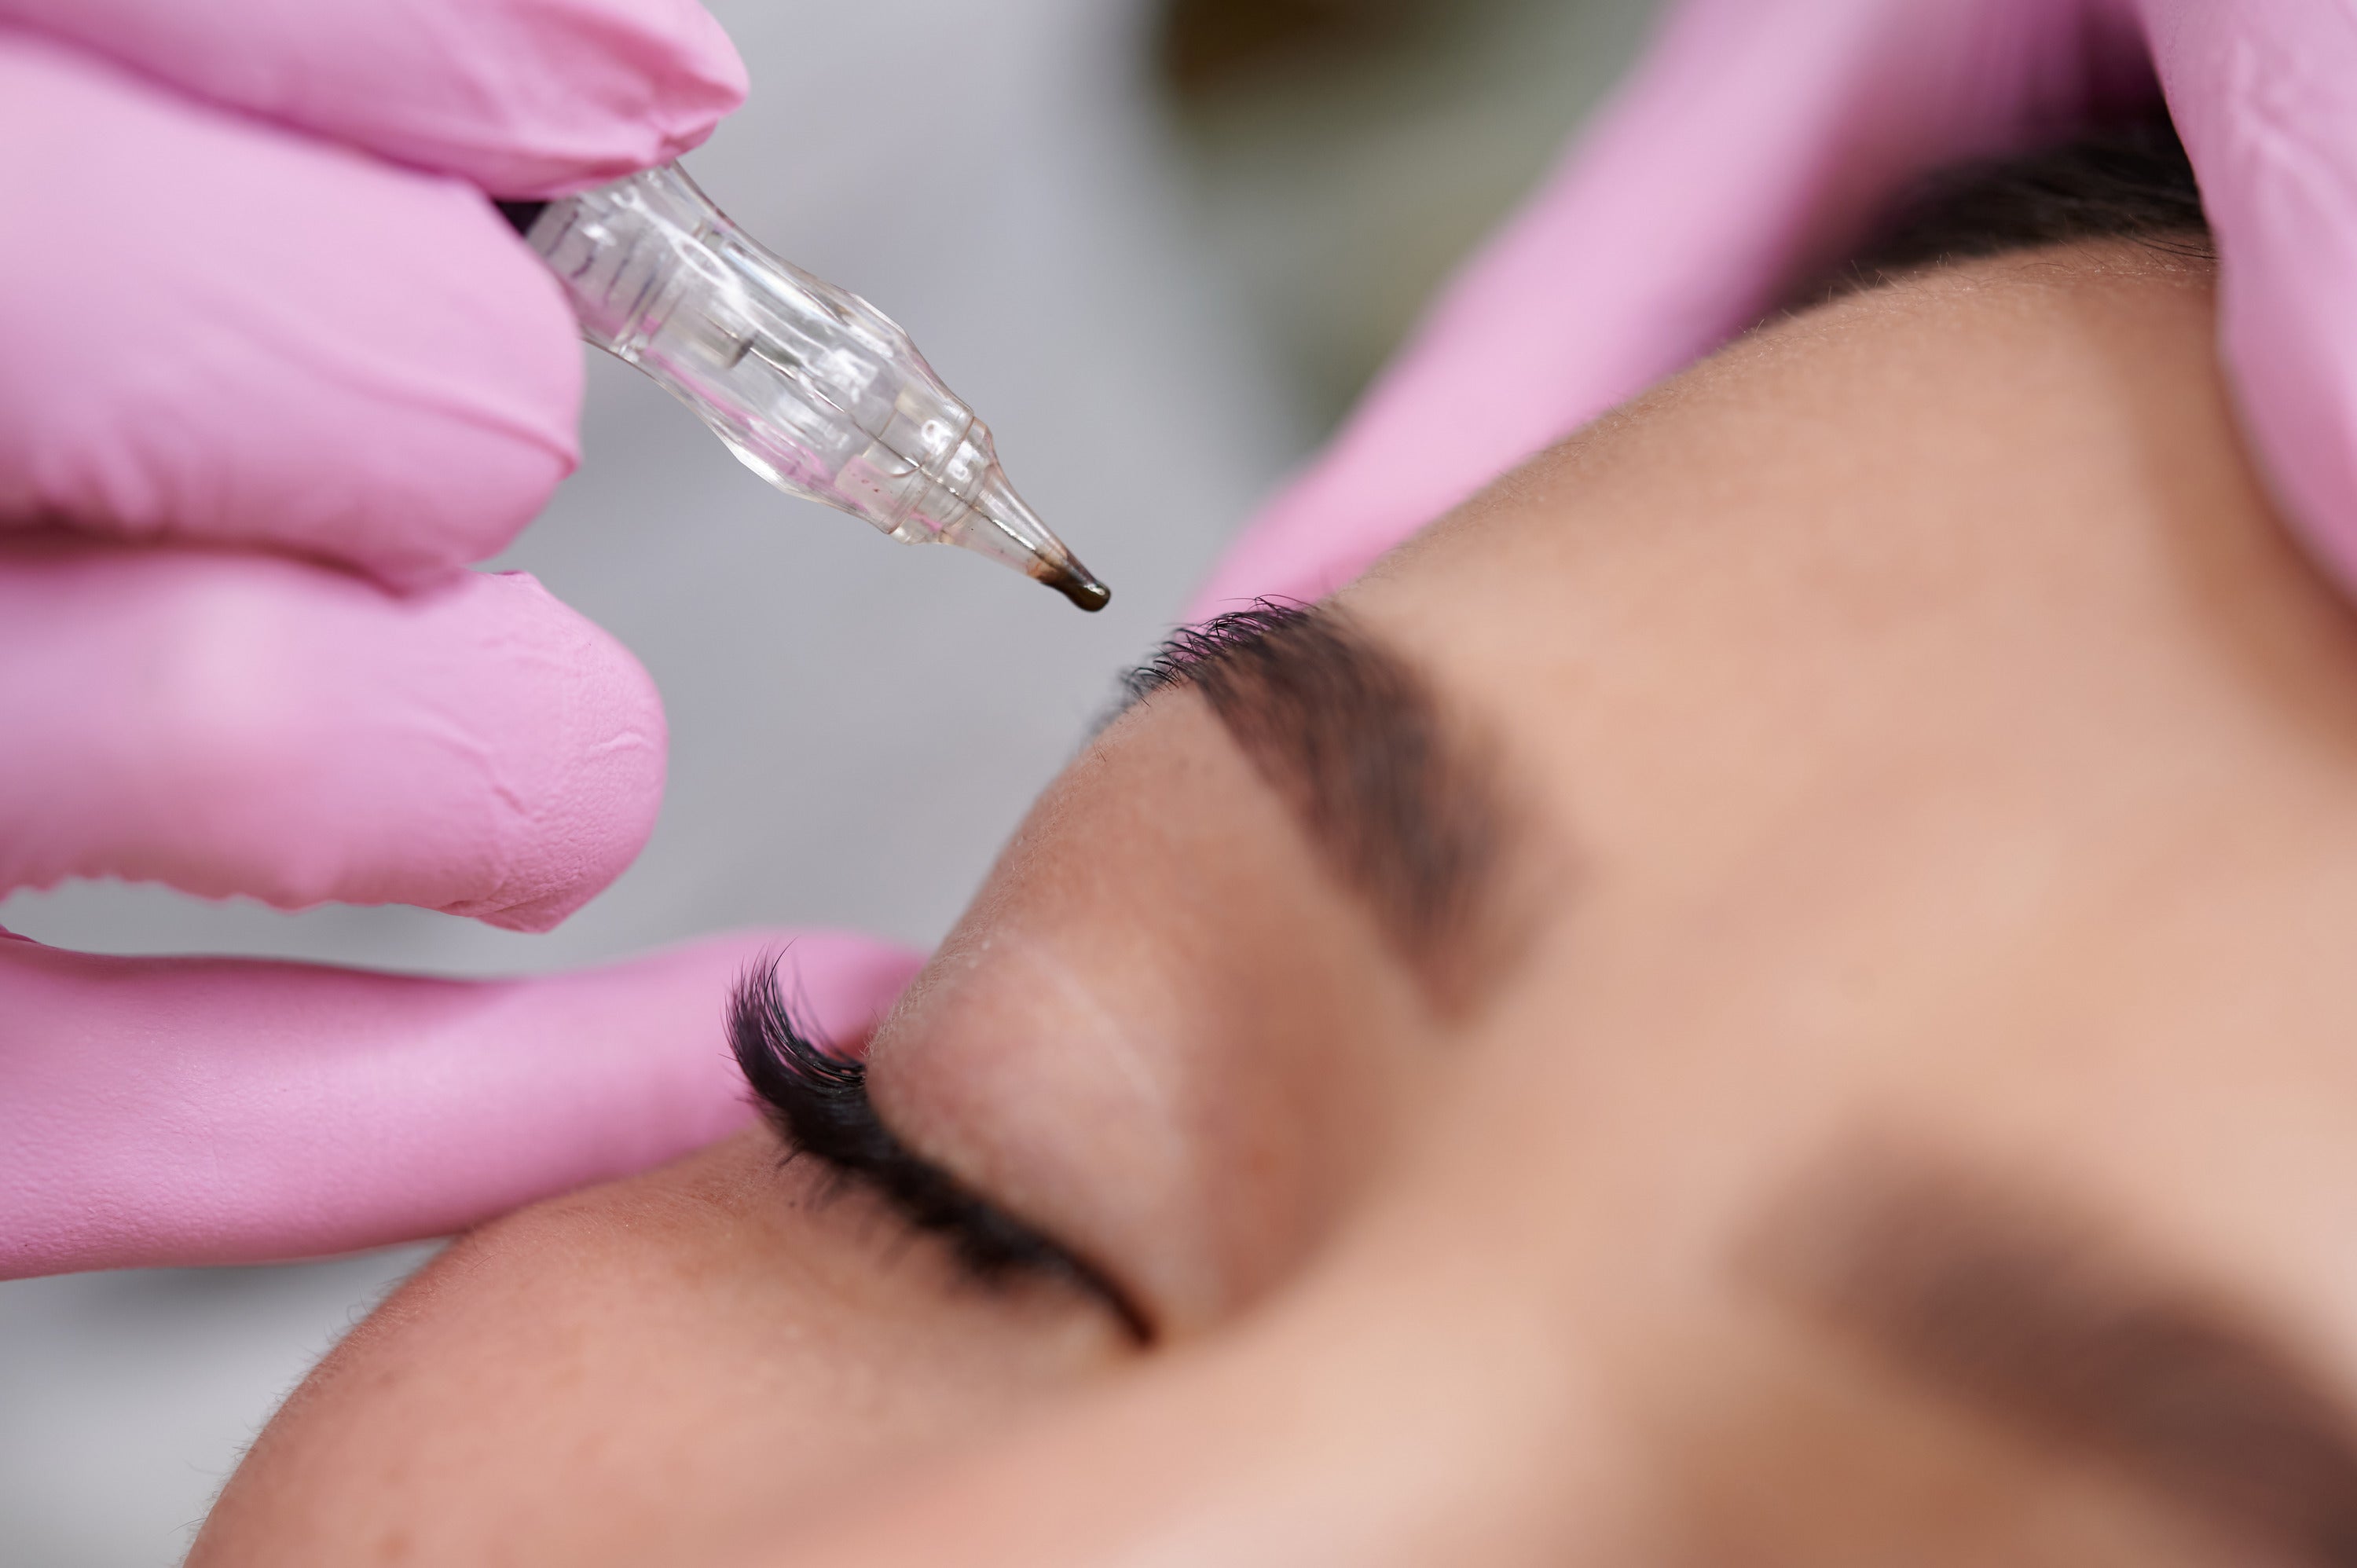 The risks of washing your microbladed eyebrows is loss of pigment